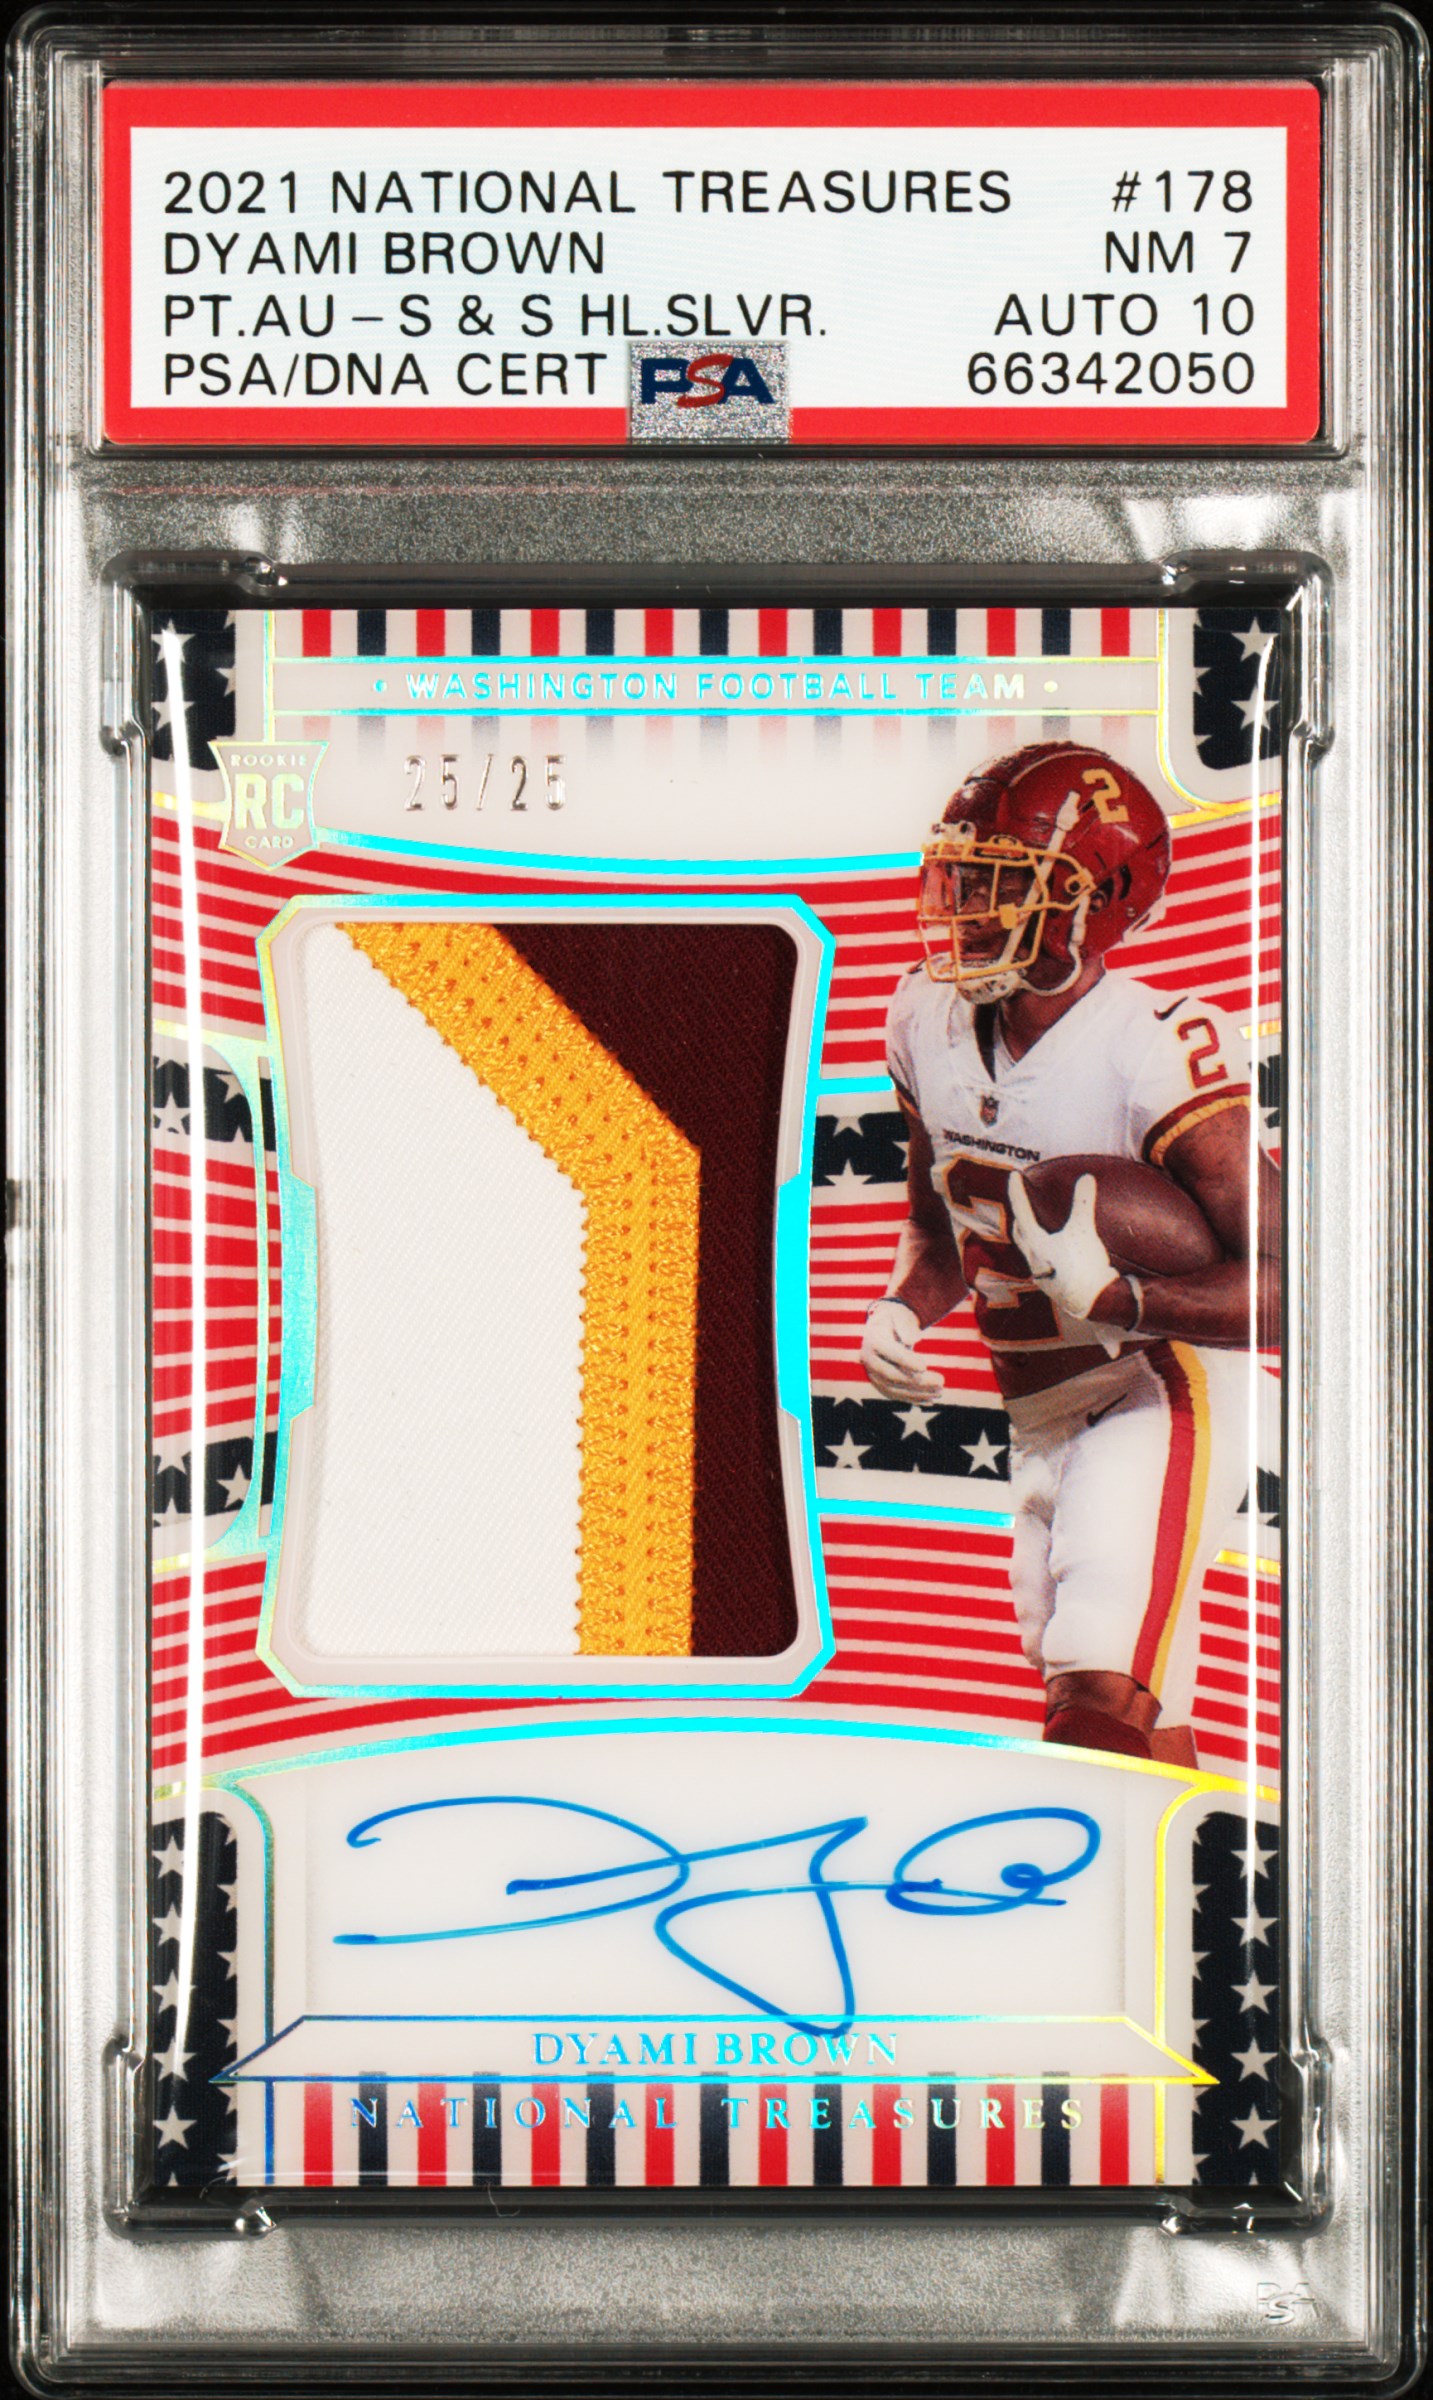 2021 Panini National Treasures Rookie Patch Autograph (RPA) Stars & Stripes Holo Silver #178 Dyami Brown Signed Patch Rookie Card (#25/25) – PSA NM 7, PSA/DNA GEM MT 10 – Pop 1